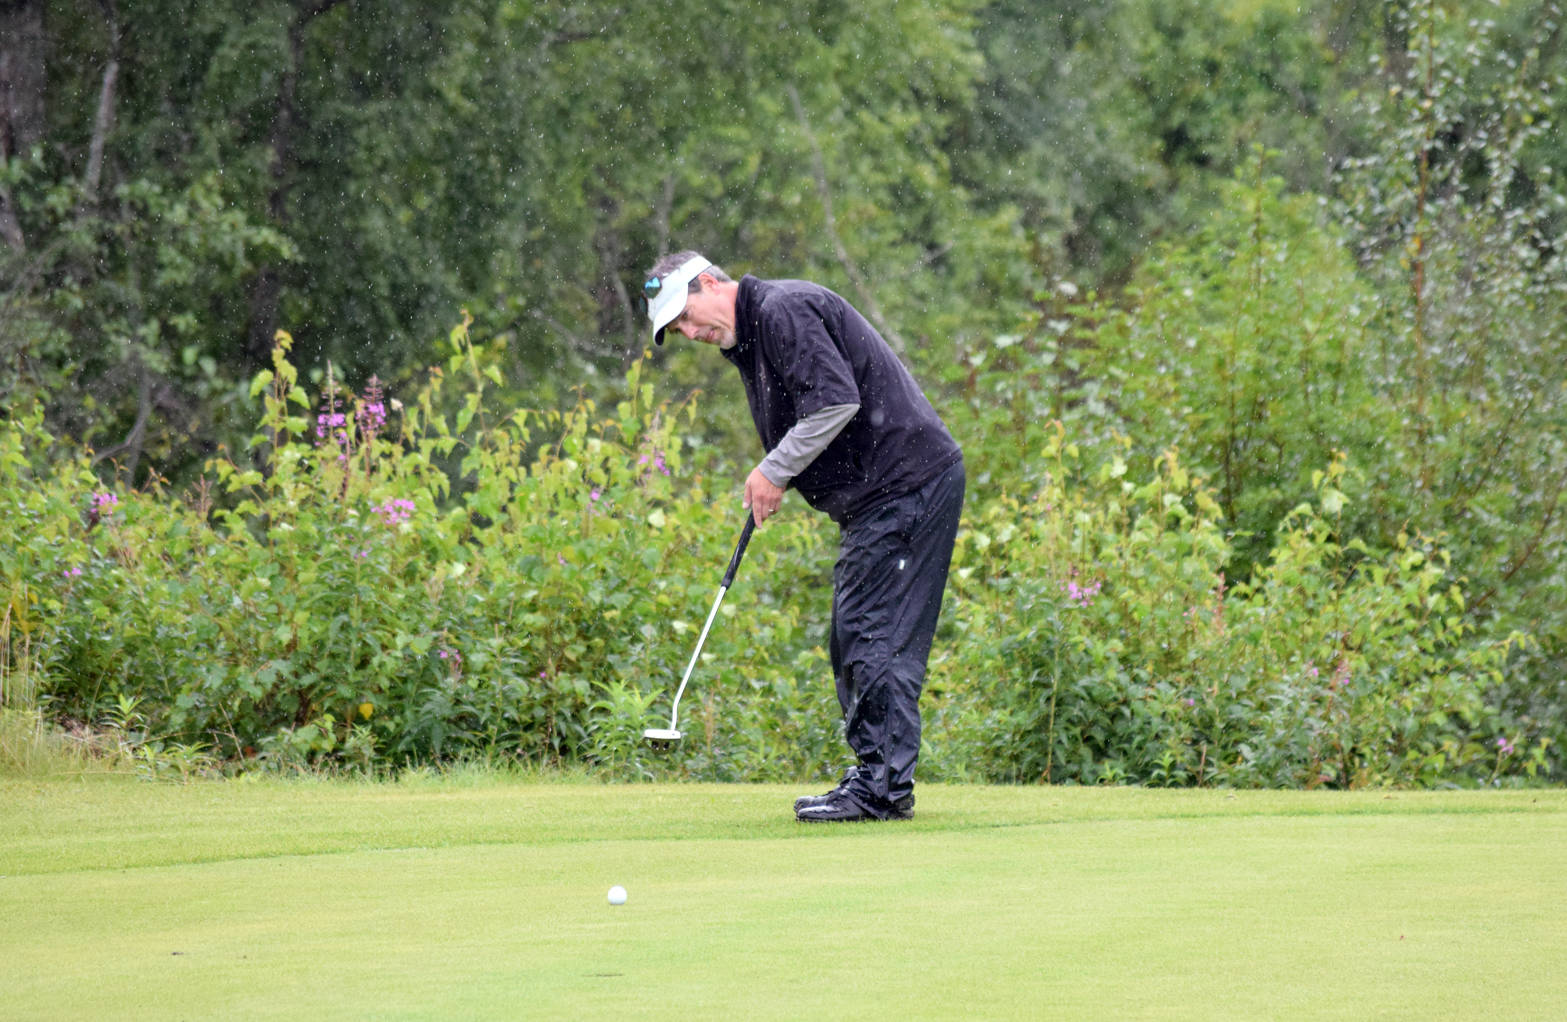 Chris Morin putts for birdie on the 18th green Sunday, Aug. 20, 2017, at the Kenai Golf Course during the Kenai Open. Morin’s putt came up short and the three-time defending champ lost by one stroke to Max Dye. (Photo by Jeff Helminiak/Peninsula Clarion)